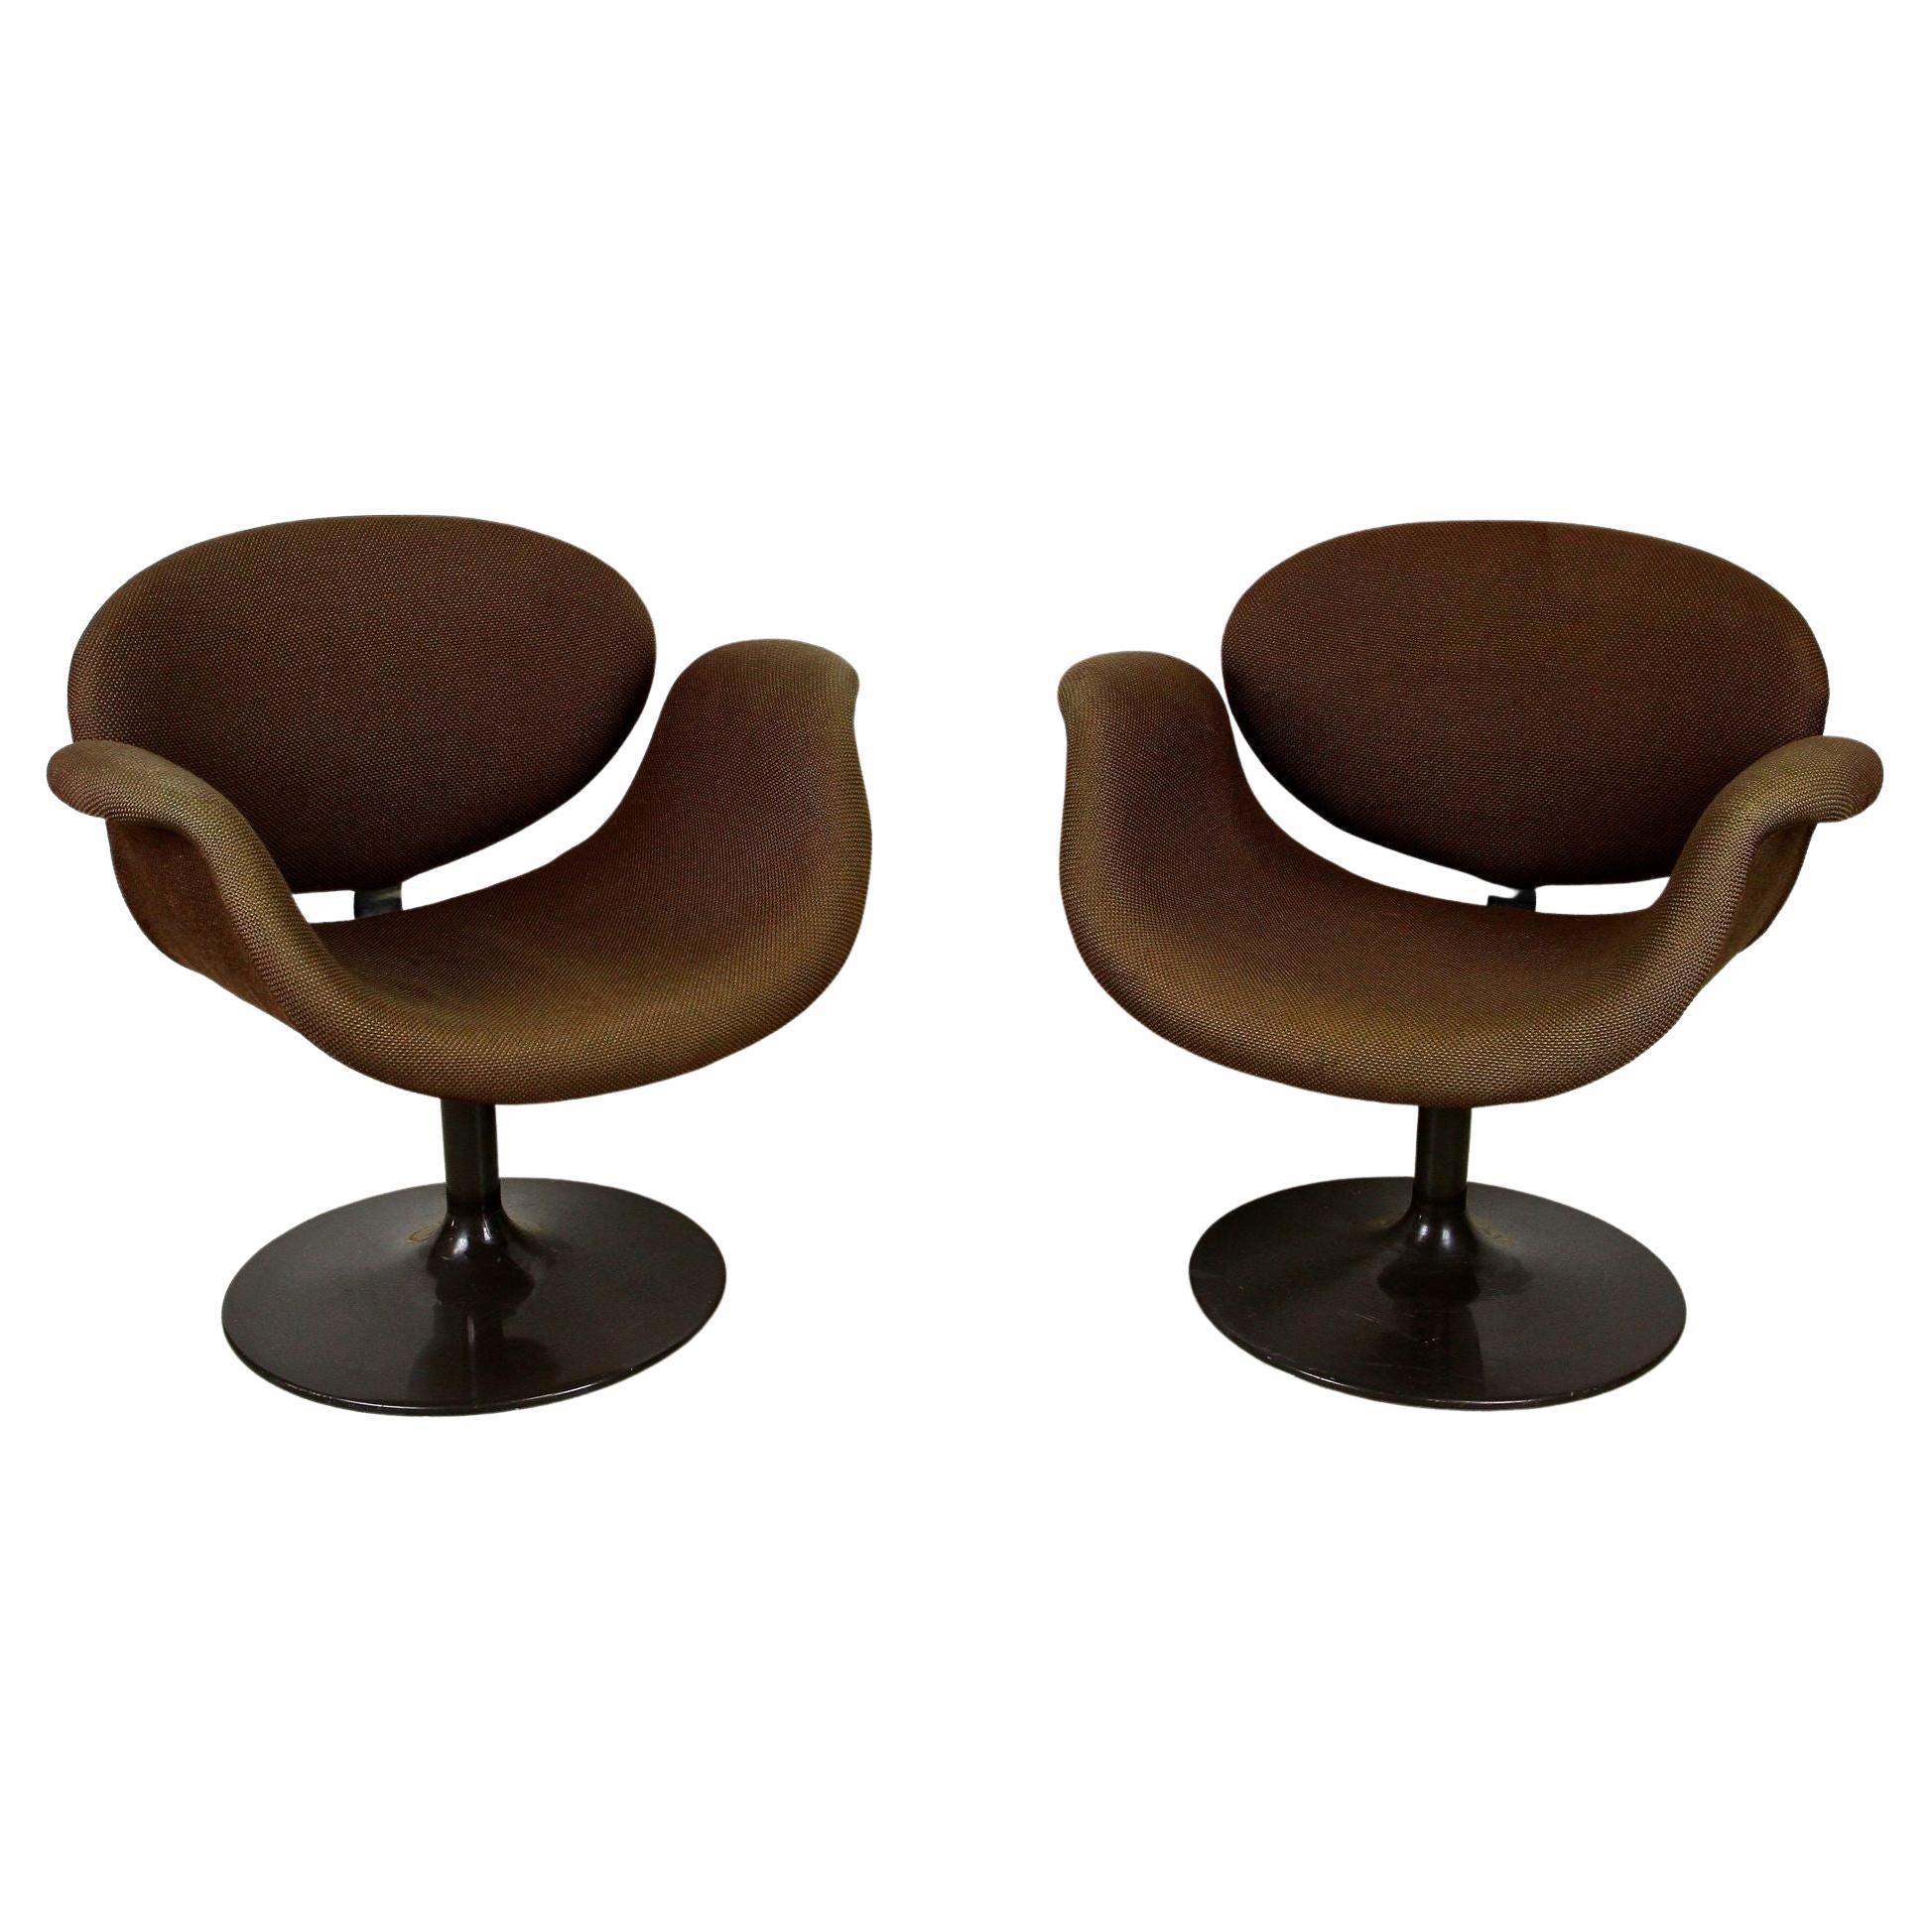 Pair of Mid-Century Swivel Tulip Armchairs by Pierre Paulin, NL circa 1965 For Sale